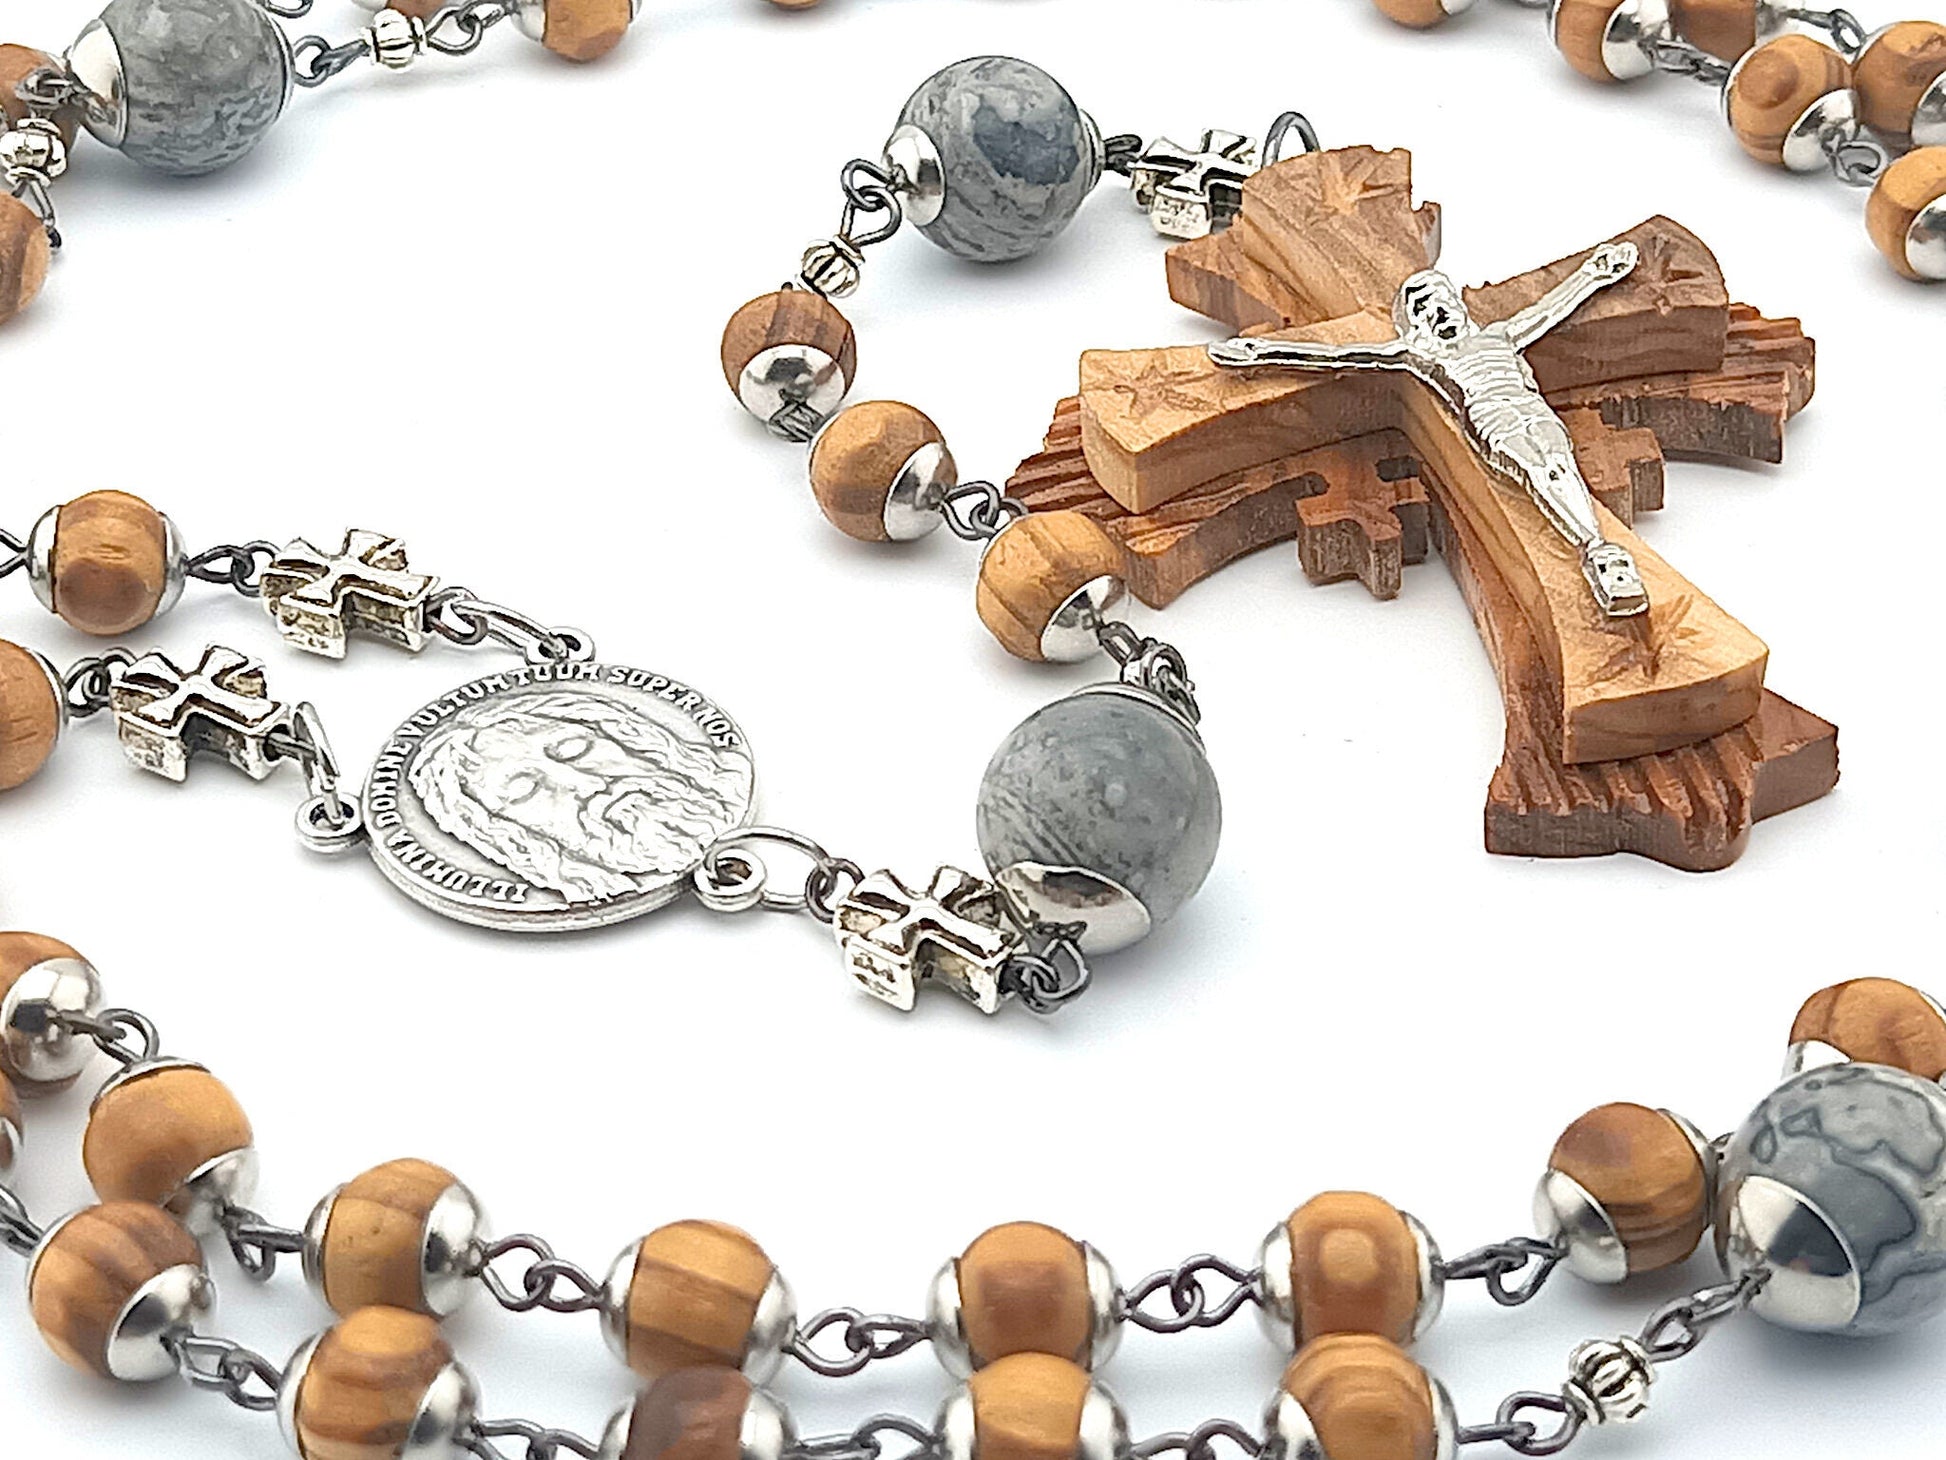 Holy Face of Jesus unique rosary beads with wooden beads and crucifix, stainless steel bead caps, and silver cross beads.